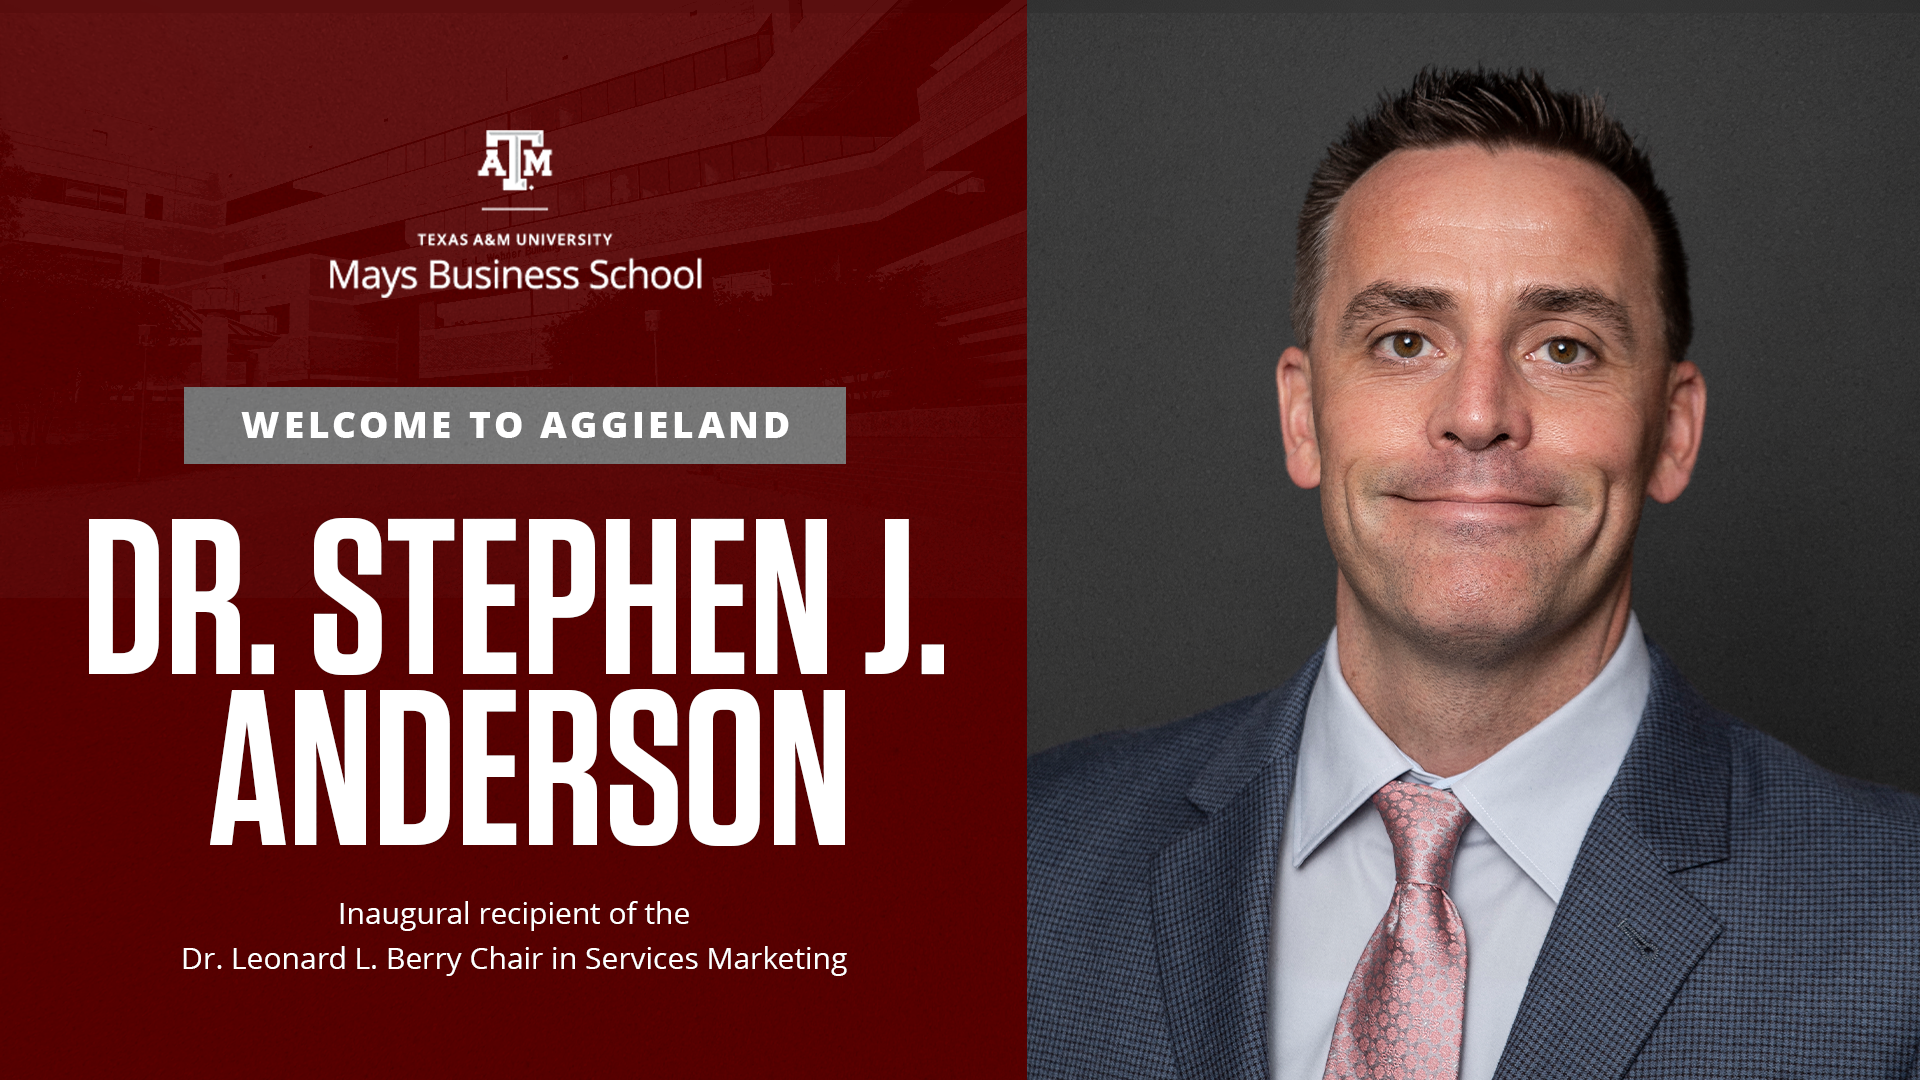 Mays Business School Welcomes Dr. Stephen J Anderson to Aggieland - photo of Dr Anderson